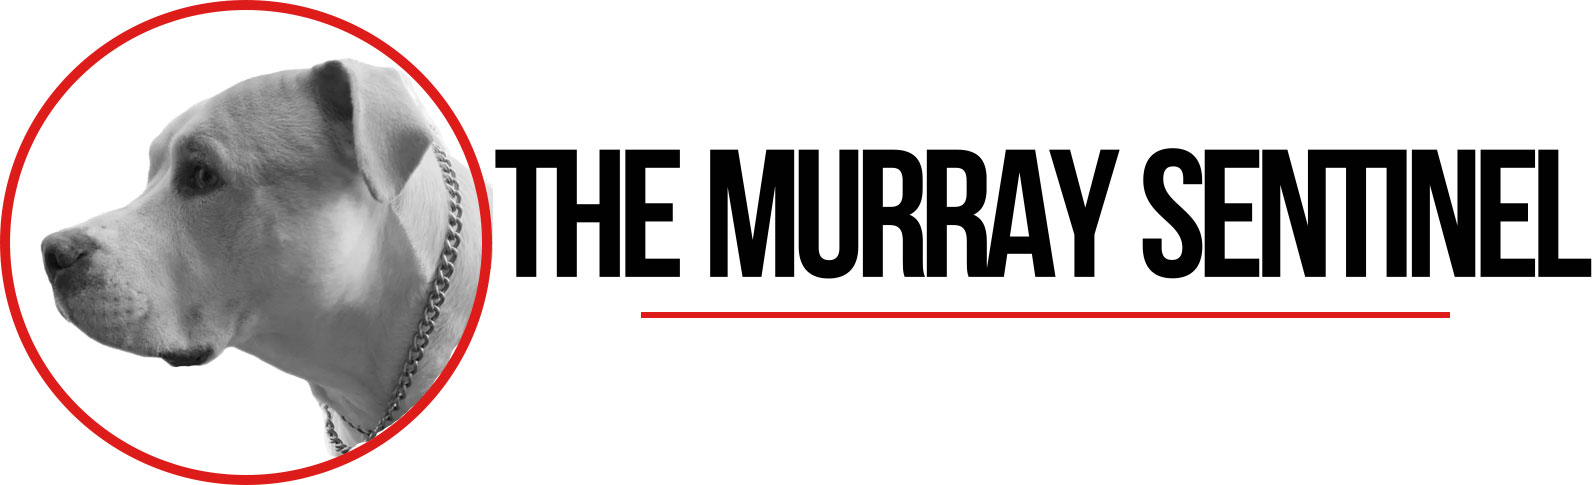 The Murray Sentinel logo with Brody